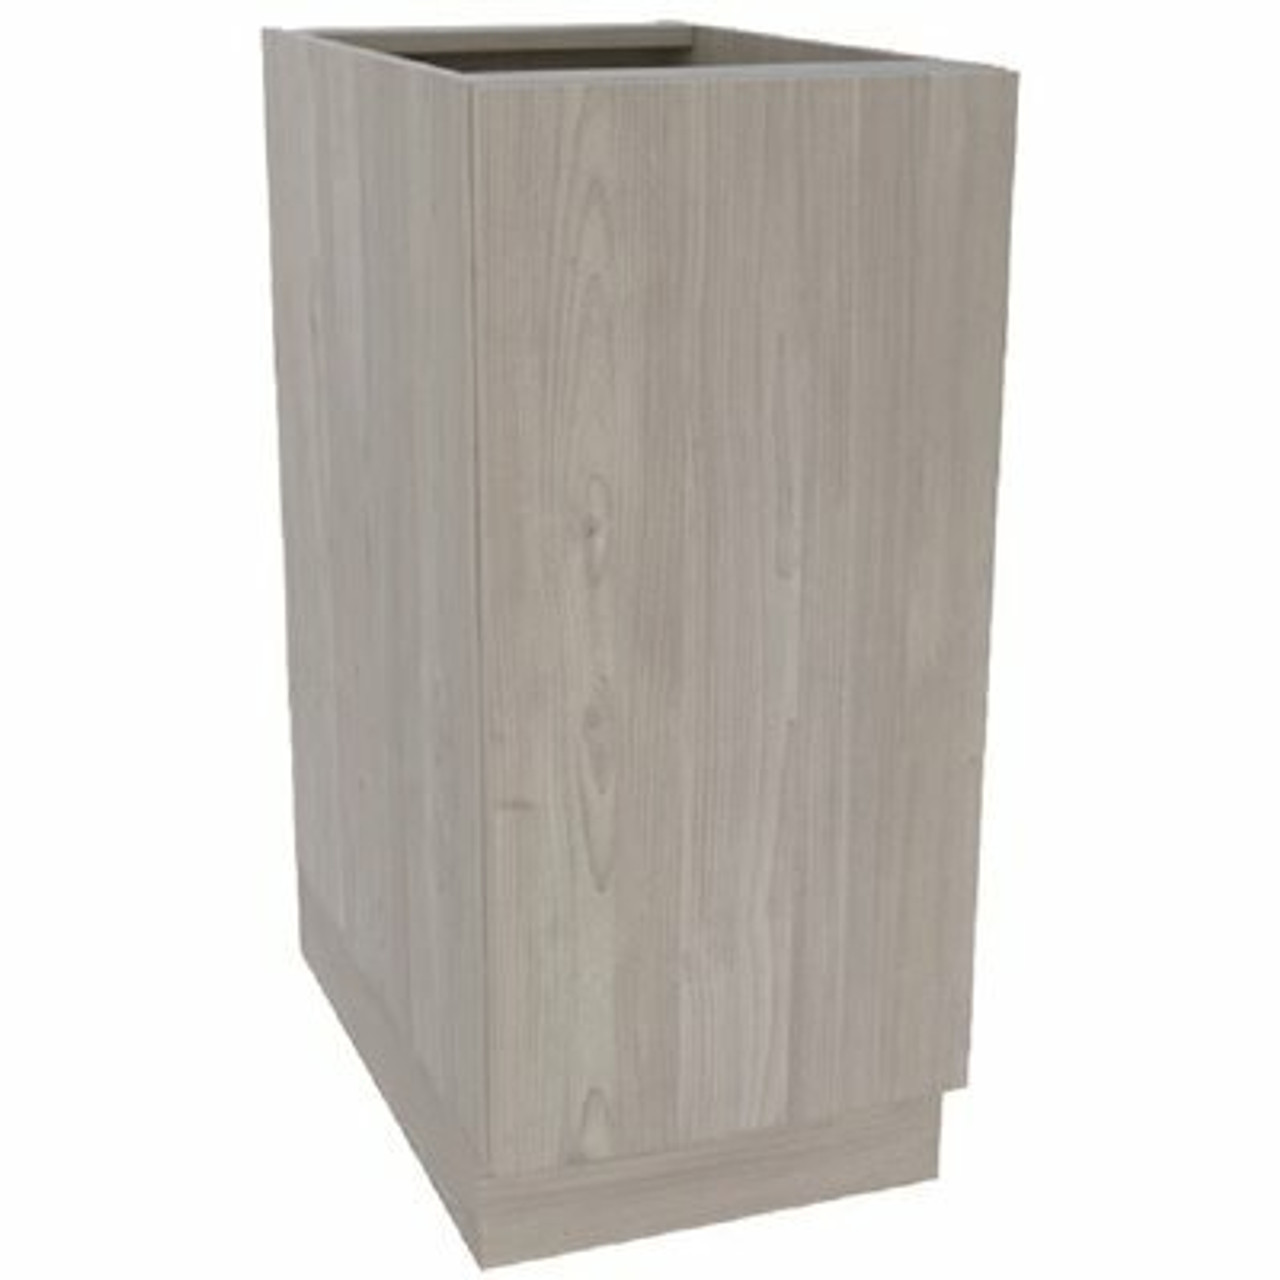 Cambridge Ready To Assemble Threespine 24 In. X 34.5 In. X 21 In. Stock Vanity Sink Base Cabinet In Nordic Grey